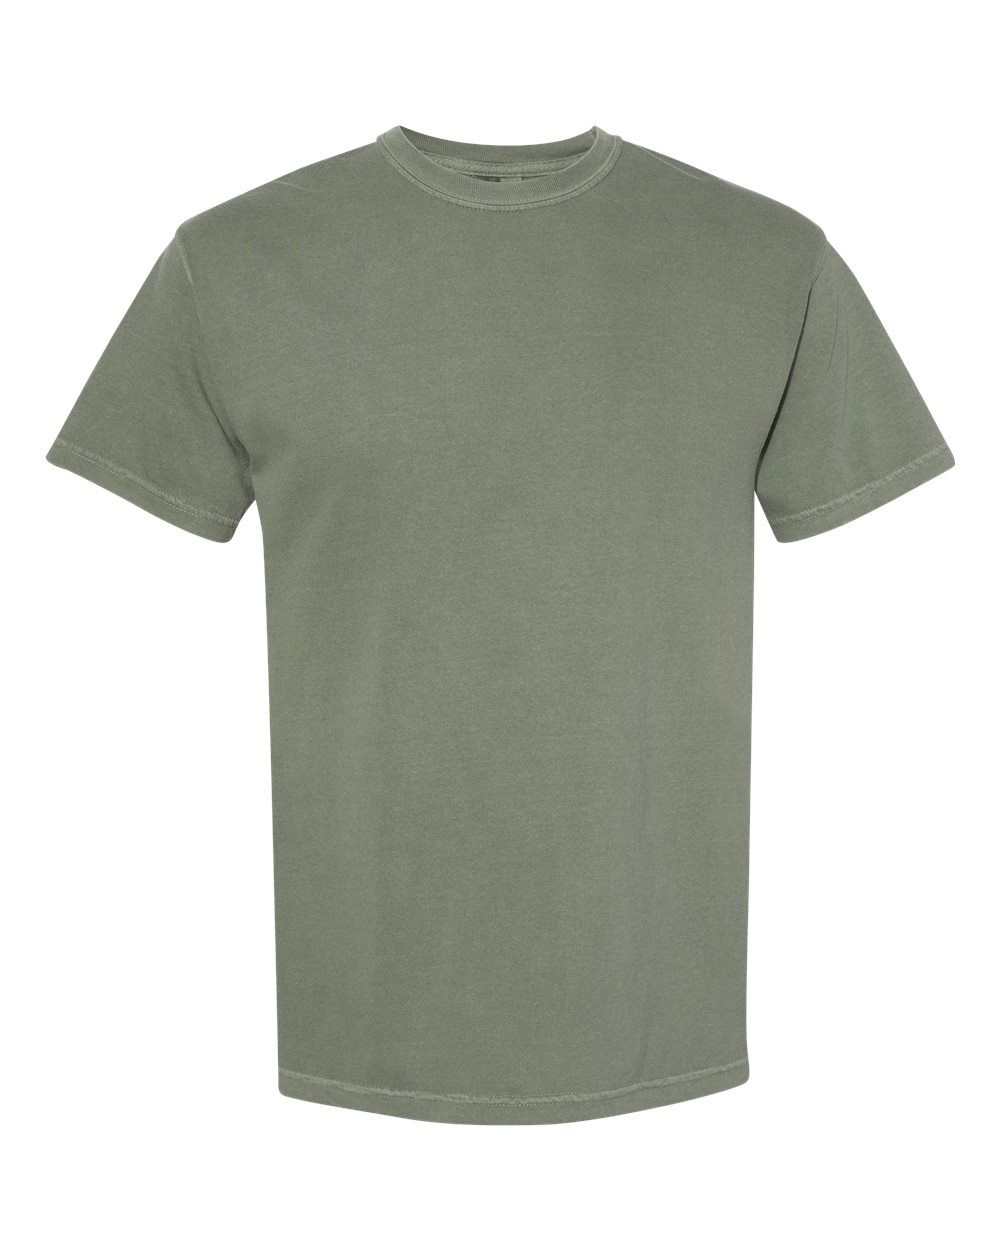 Comfort Colors Garment-Dyed Tee (1717) in Moss